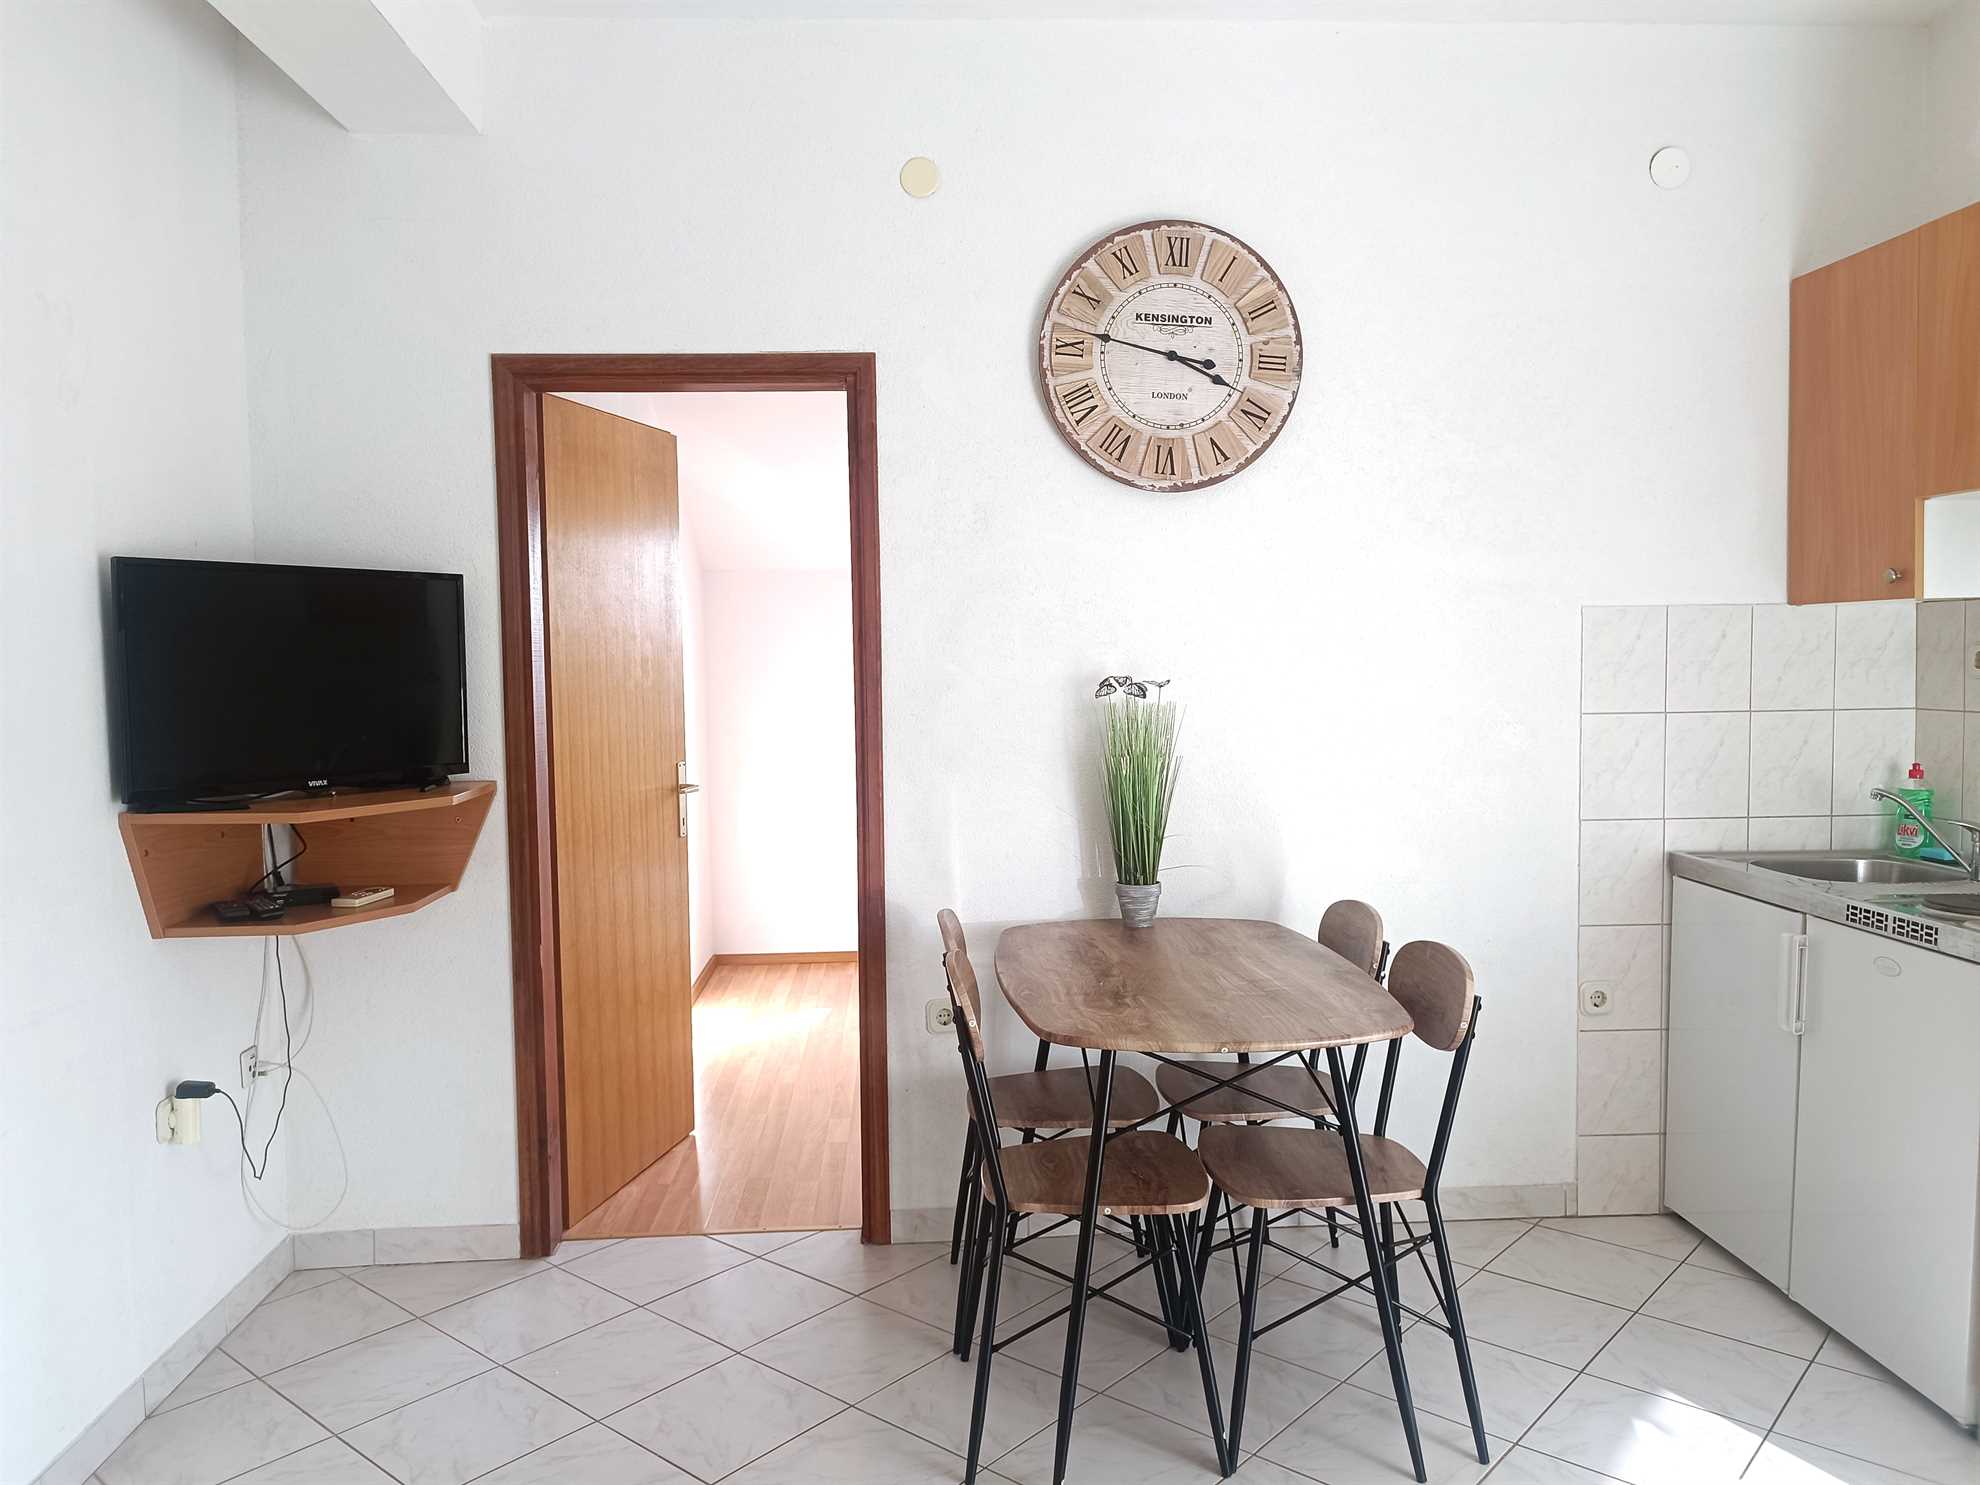 A4 One bedroom Apartment Storic for 3 guests near the beach